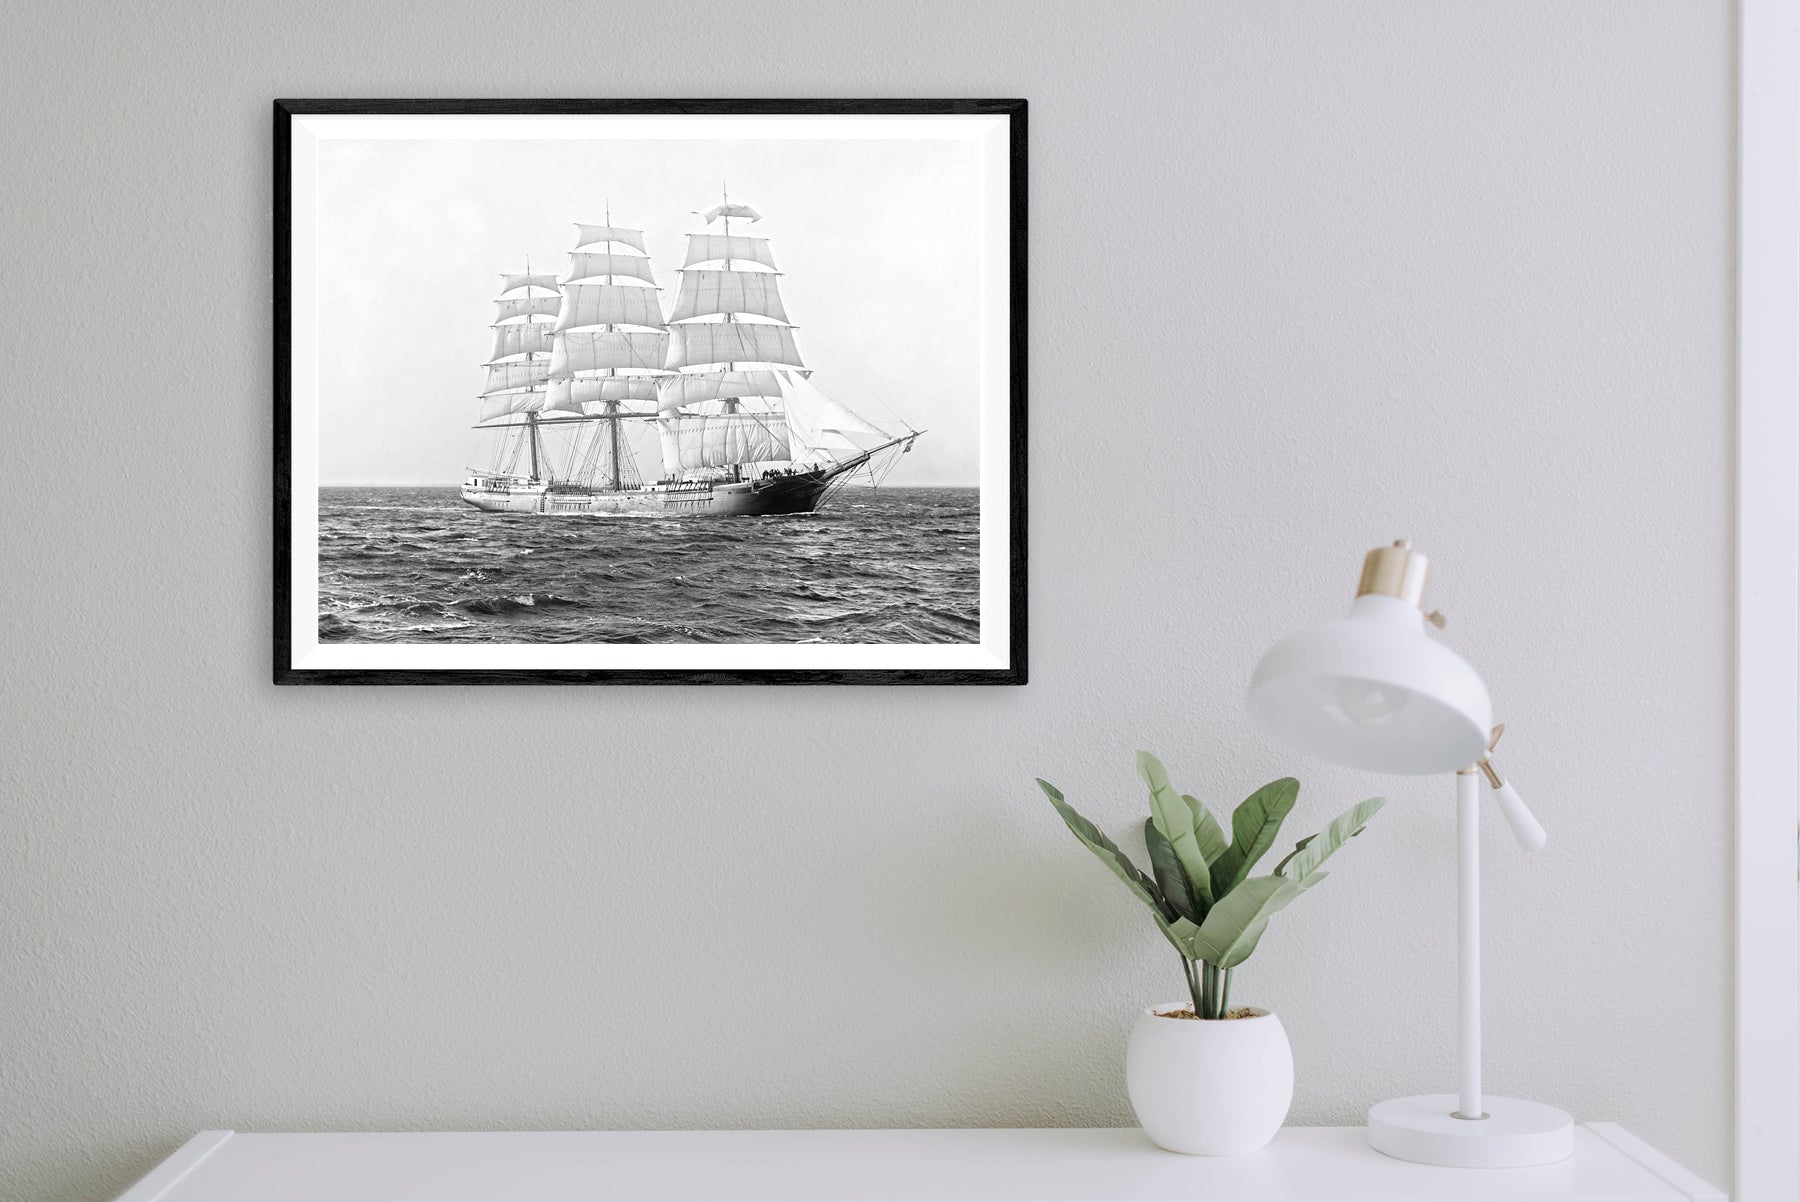 A framed paper print of a vintage photograph of a Clipper Ship hanging above a small white desk